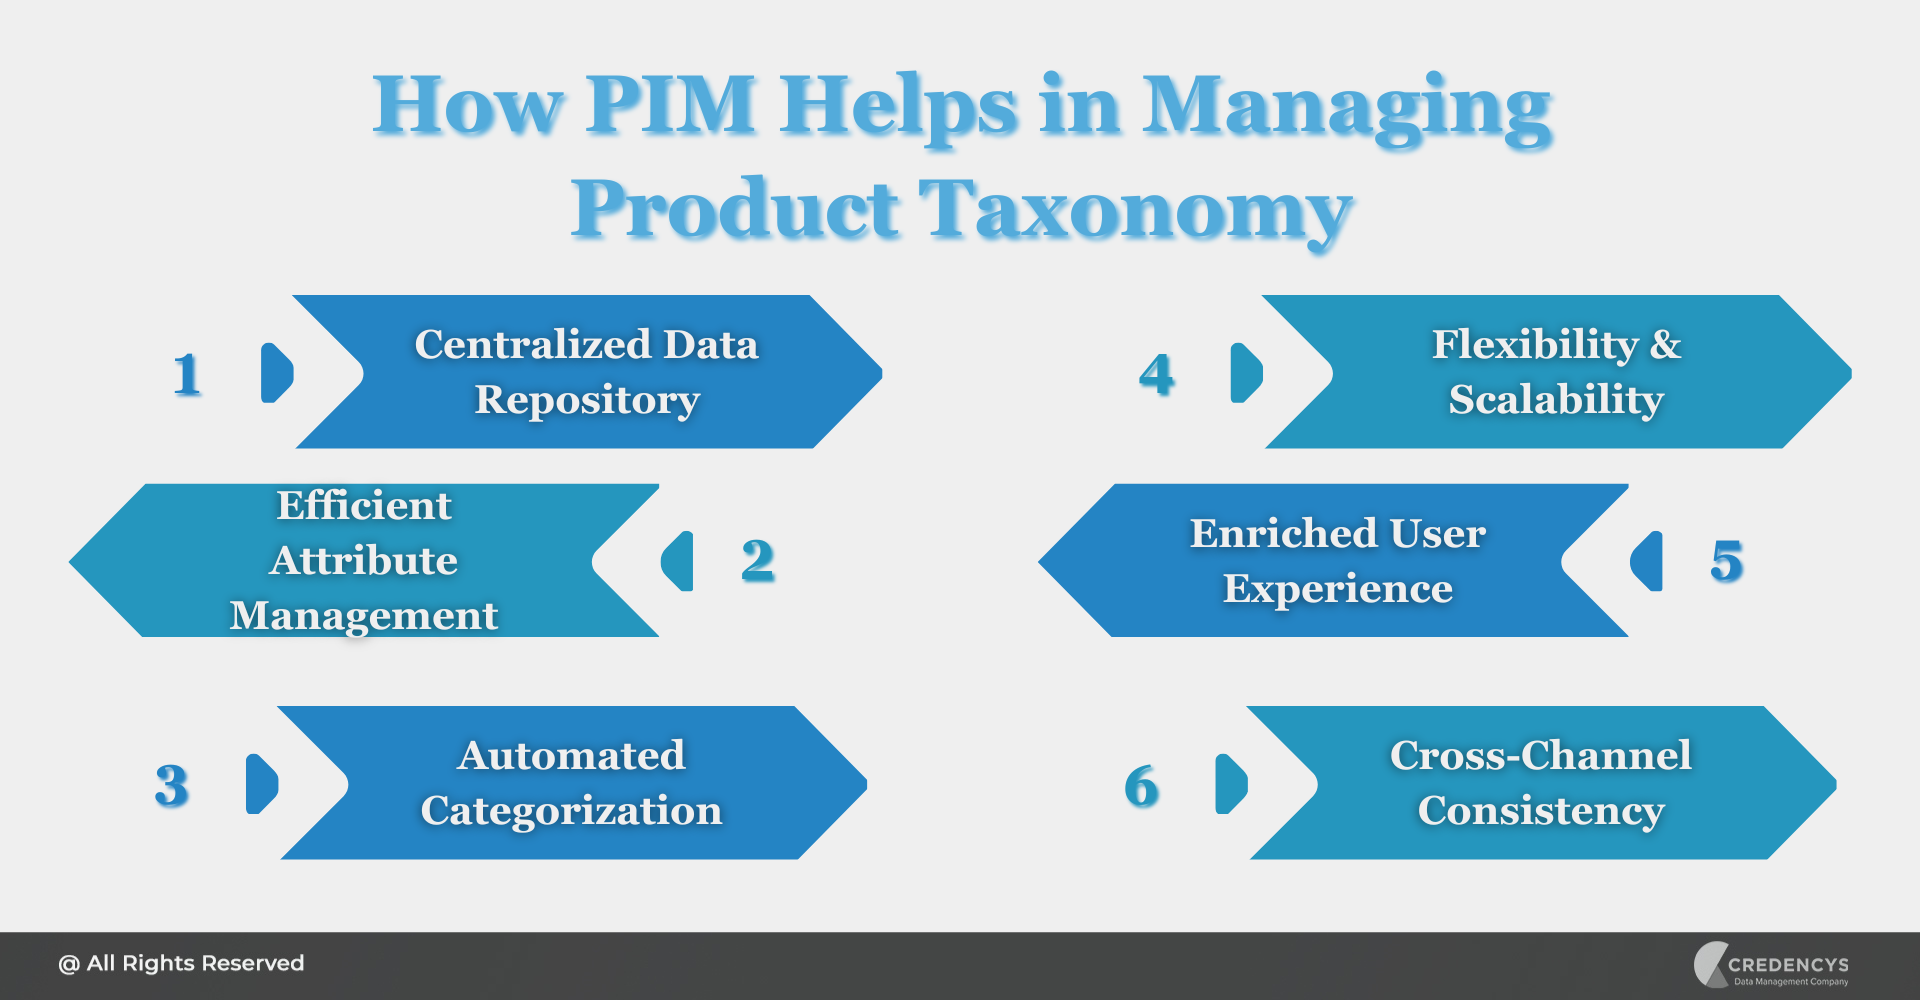 How PIM Helps in Managing Product Taxonomy